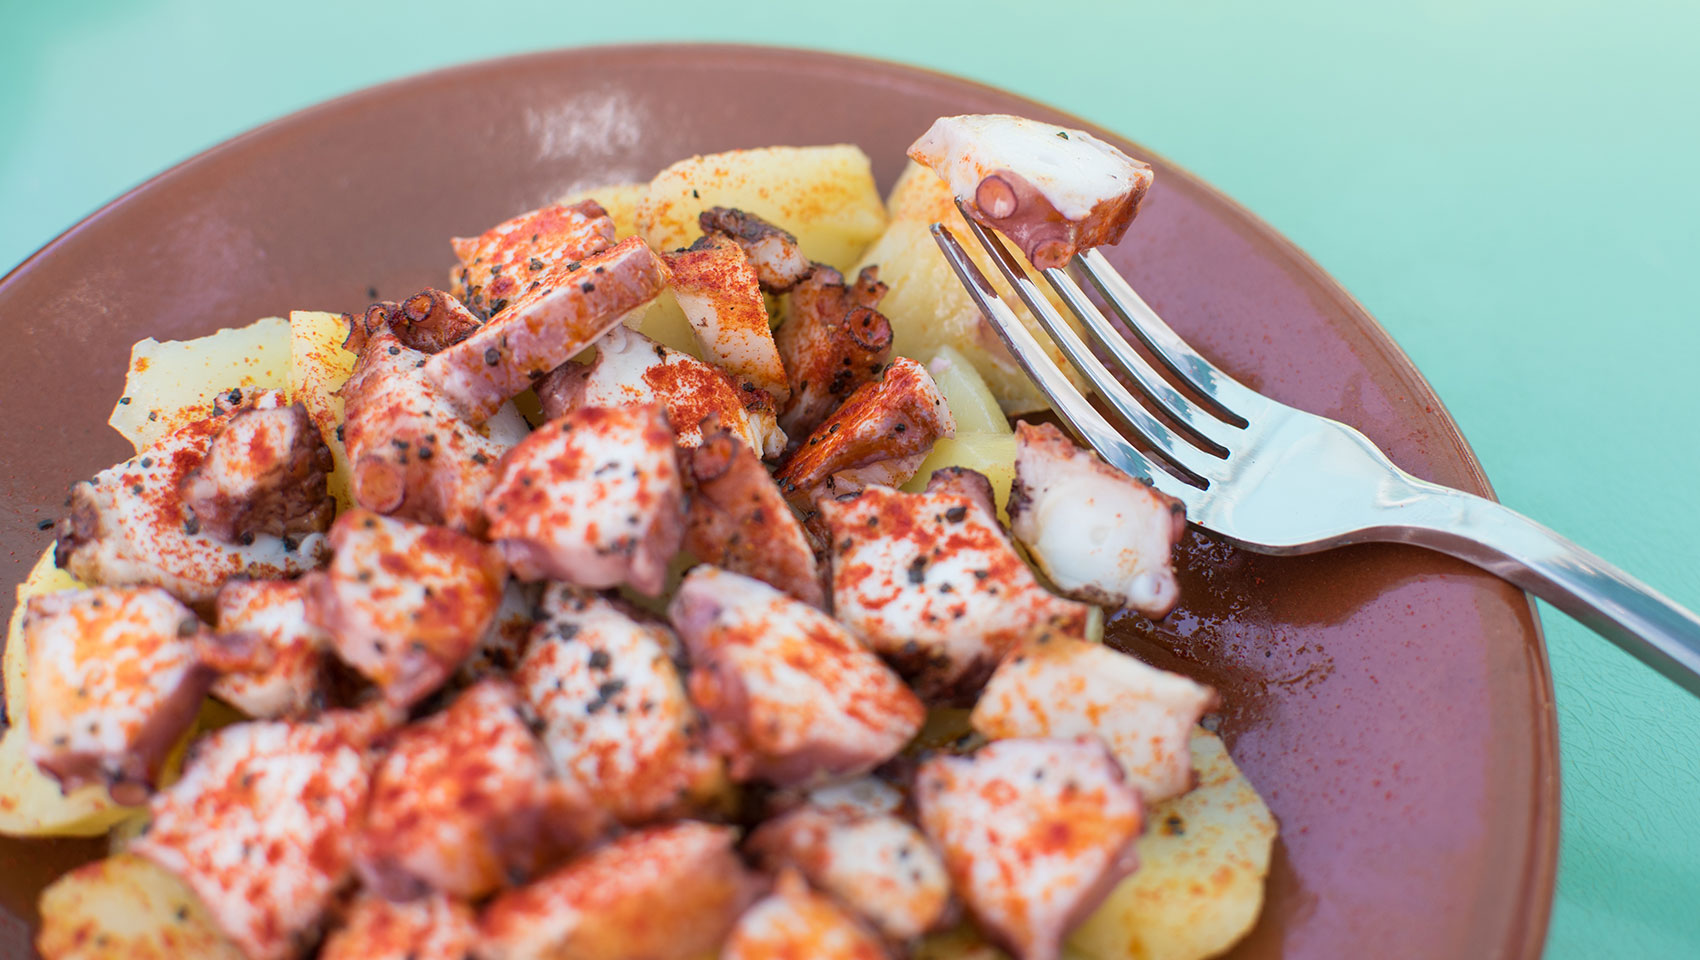 octopus-gallega-with-confit-potato-olive-oil-red-paprika-and-black-salt-photo-credit-adorned-photography